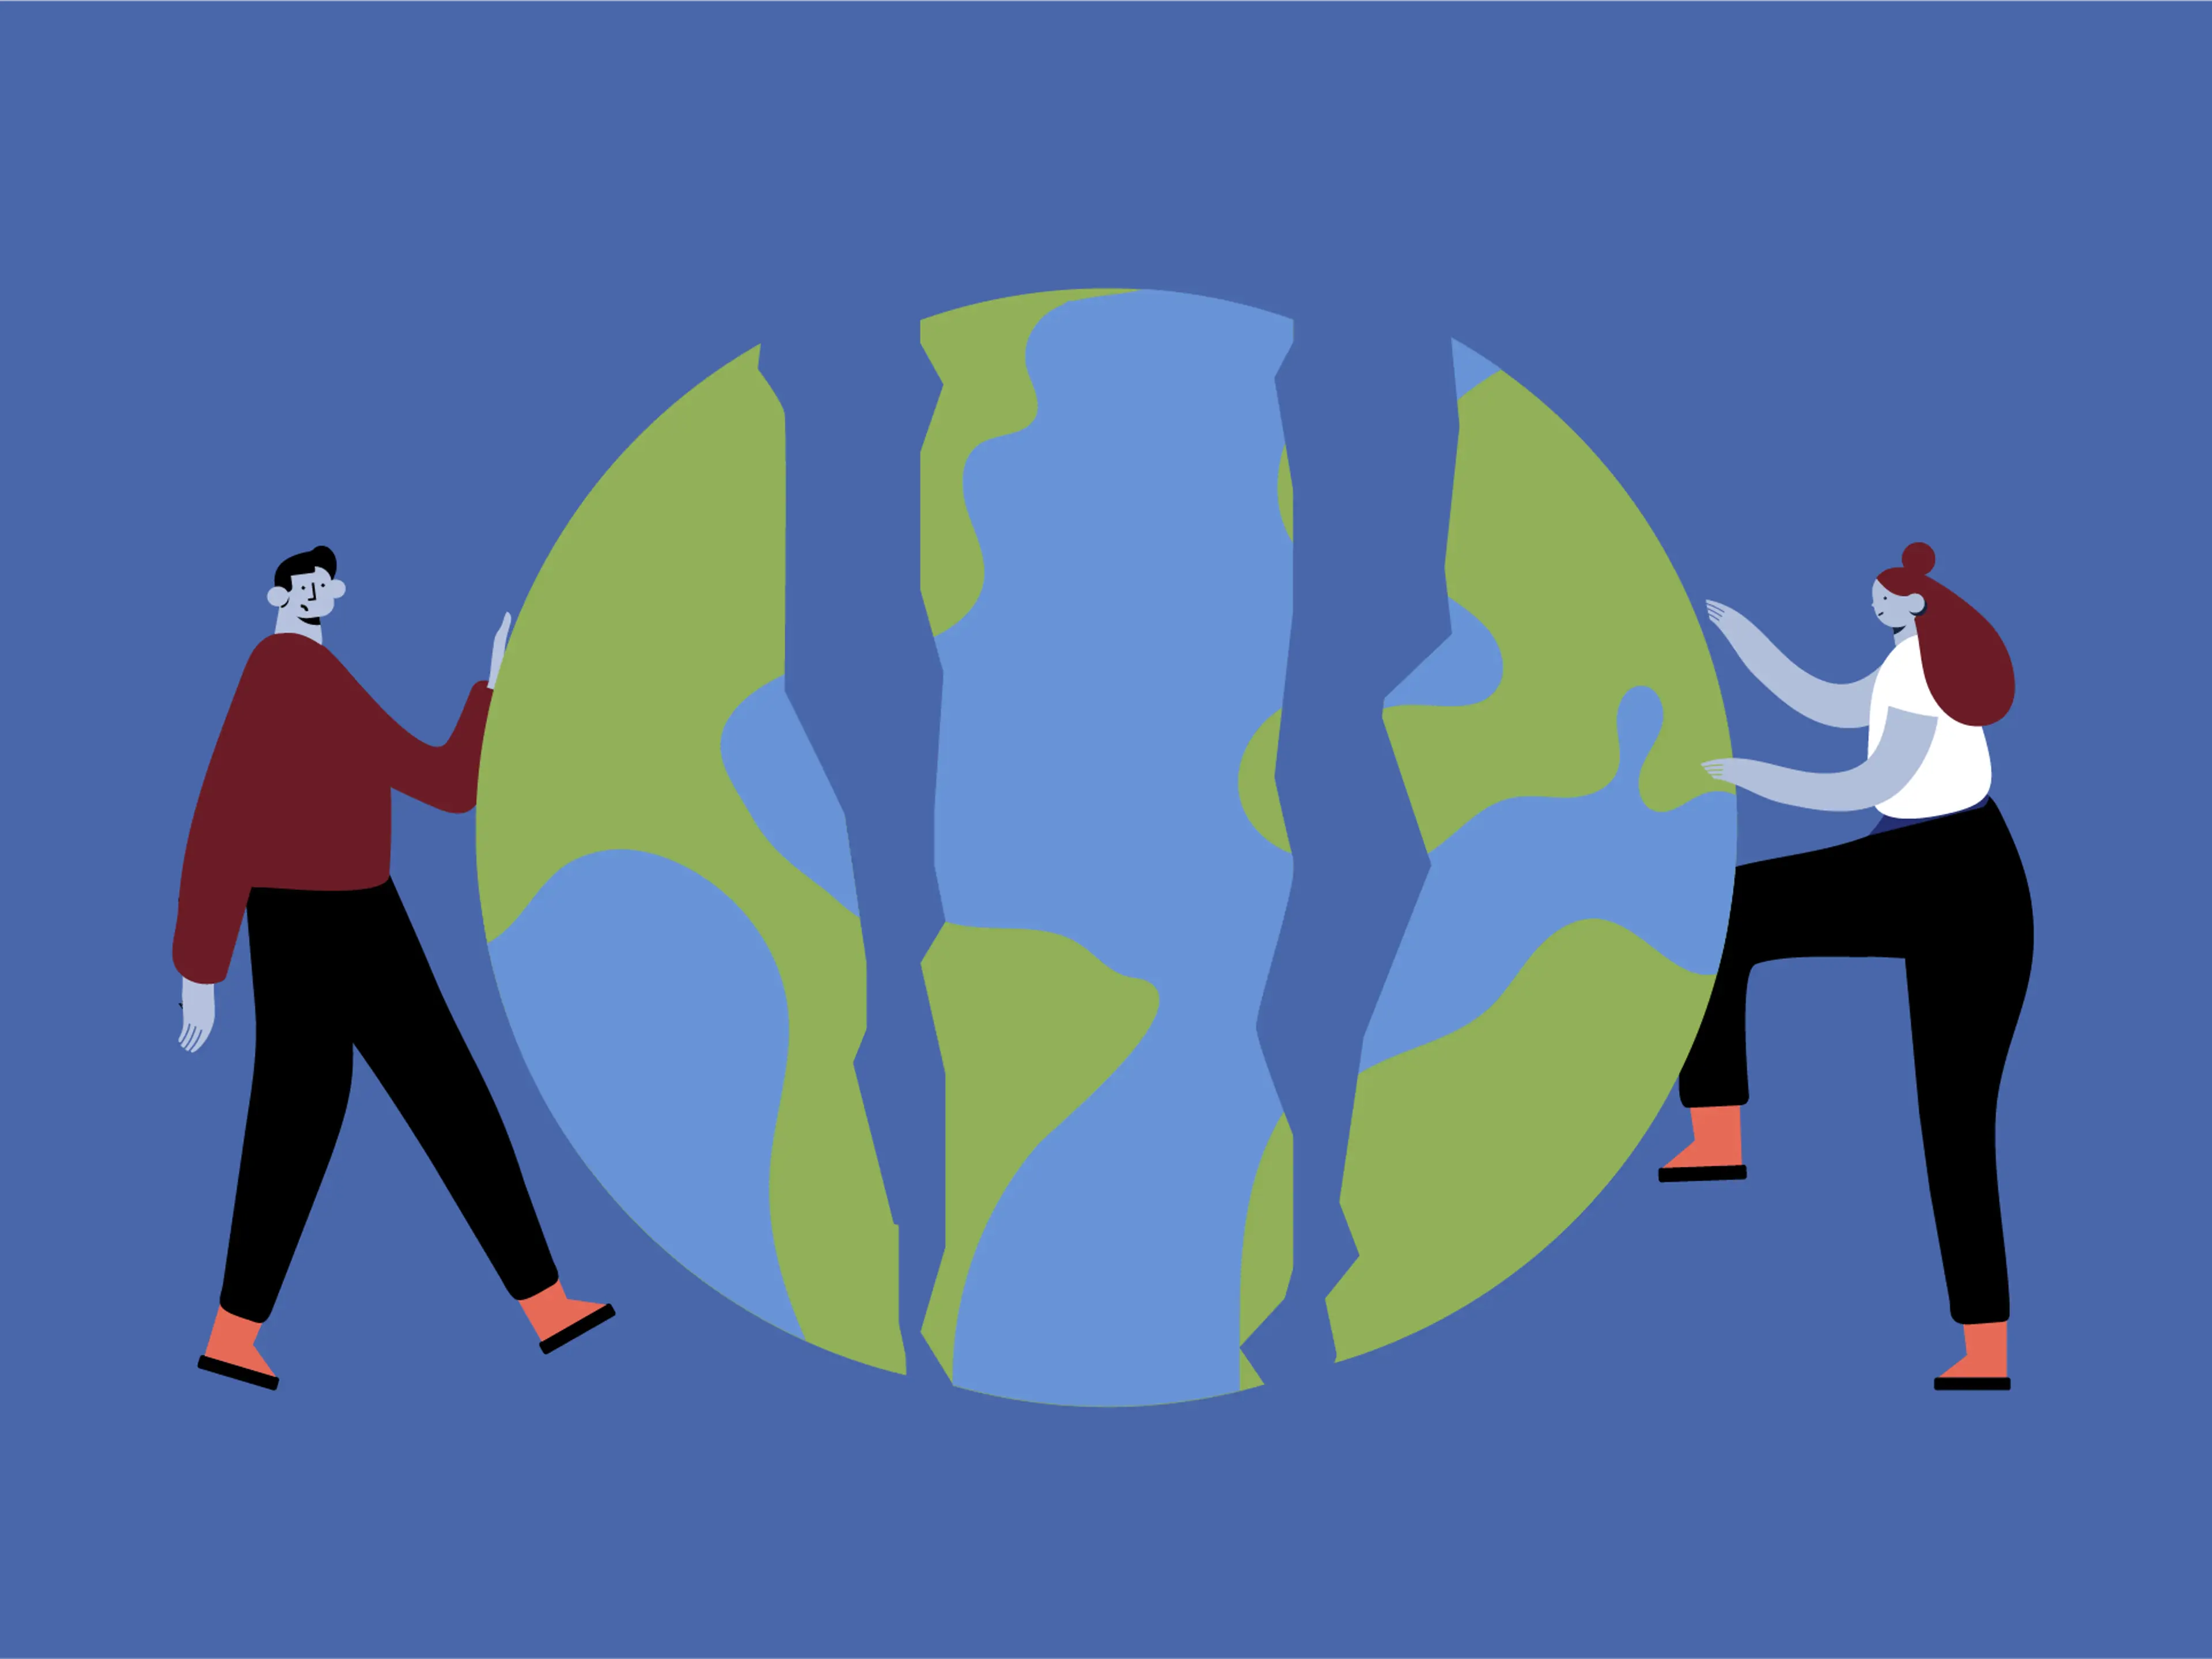 Drawing of a man and a woman holding a world globe approximately their size, with the globe being torn in 3 vertical parts